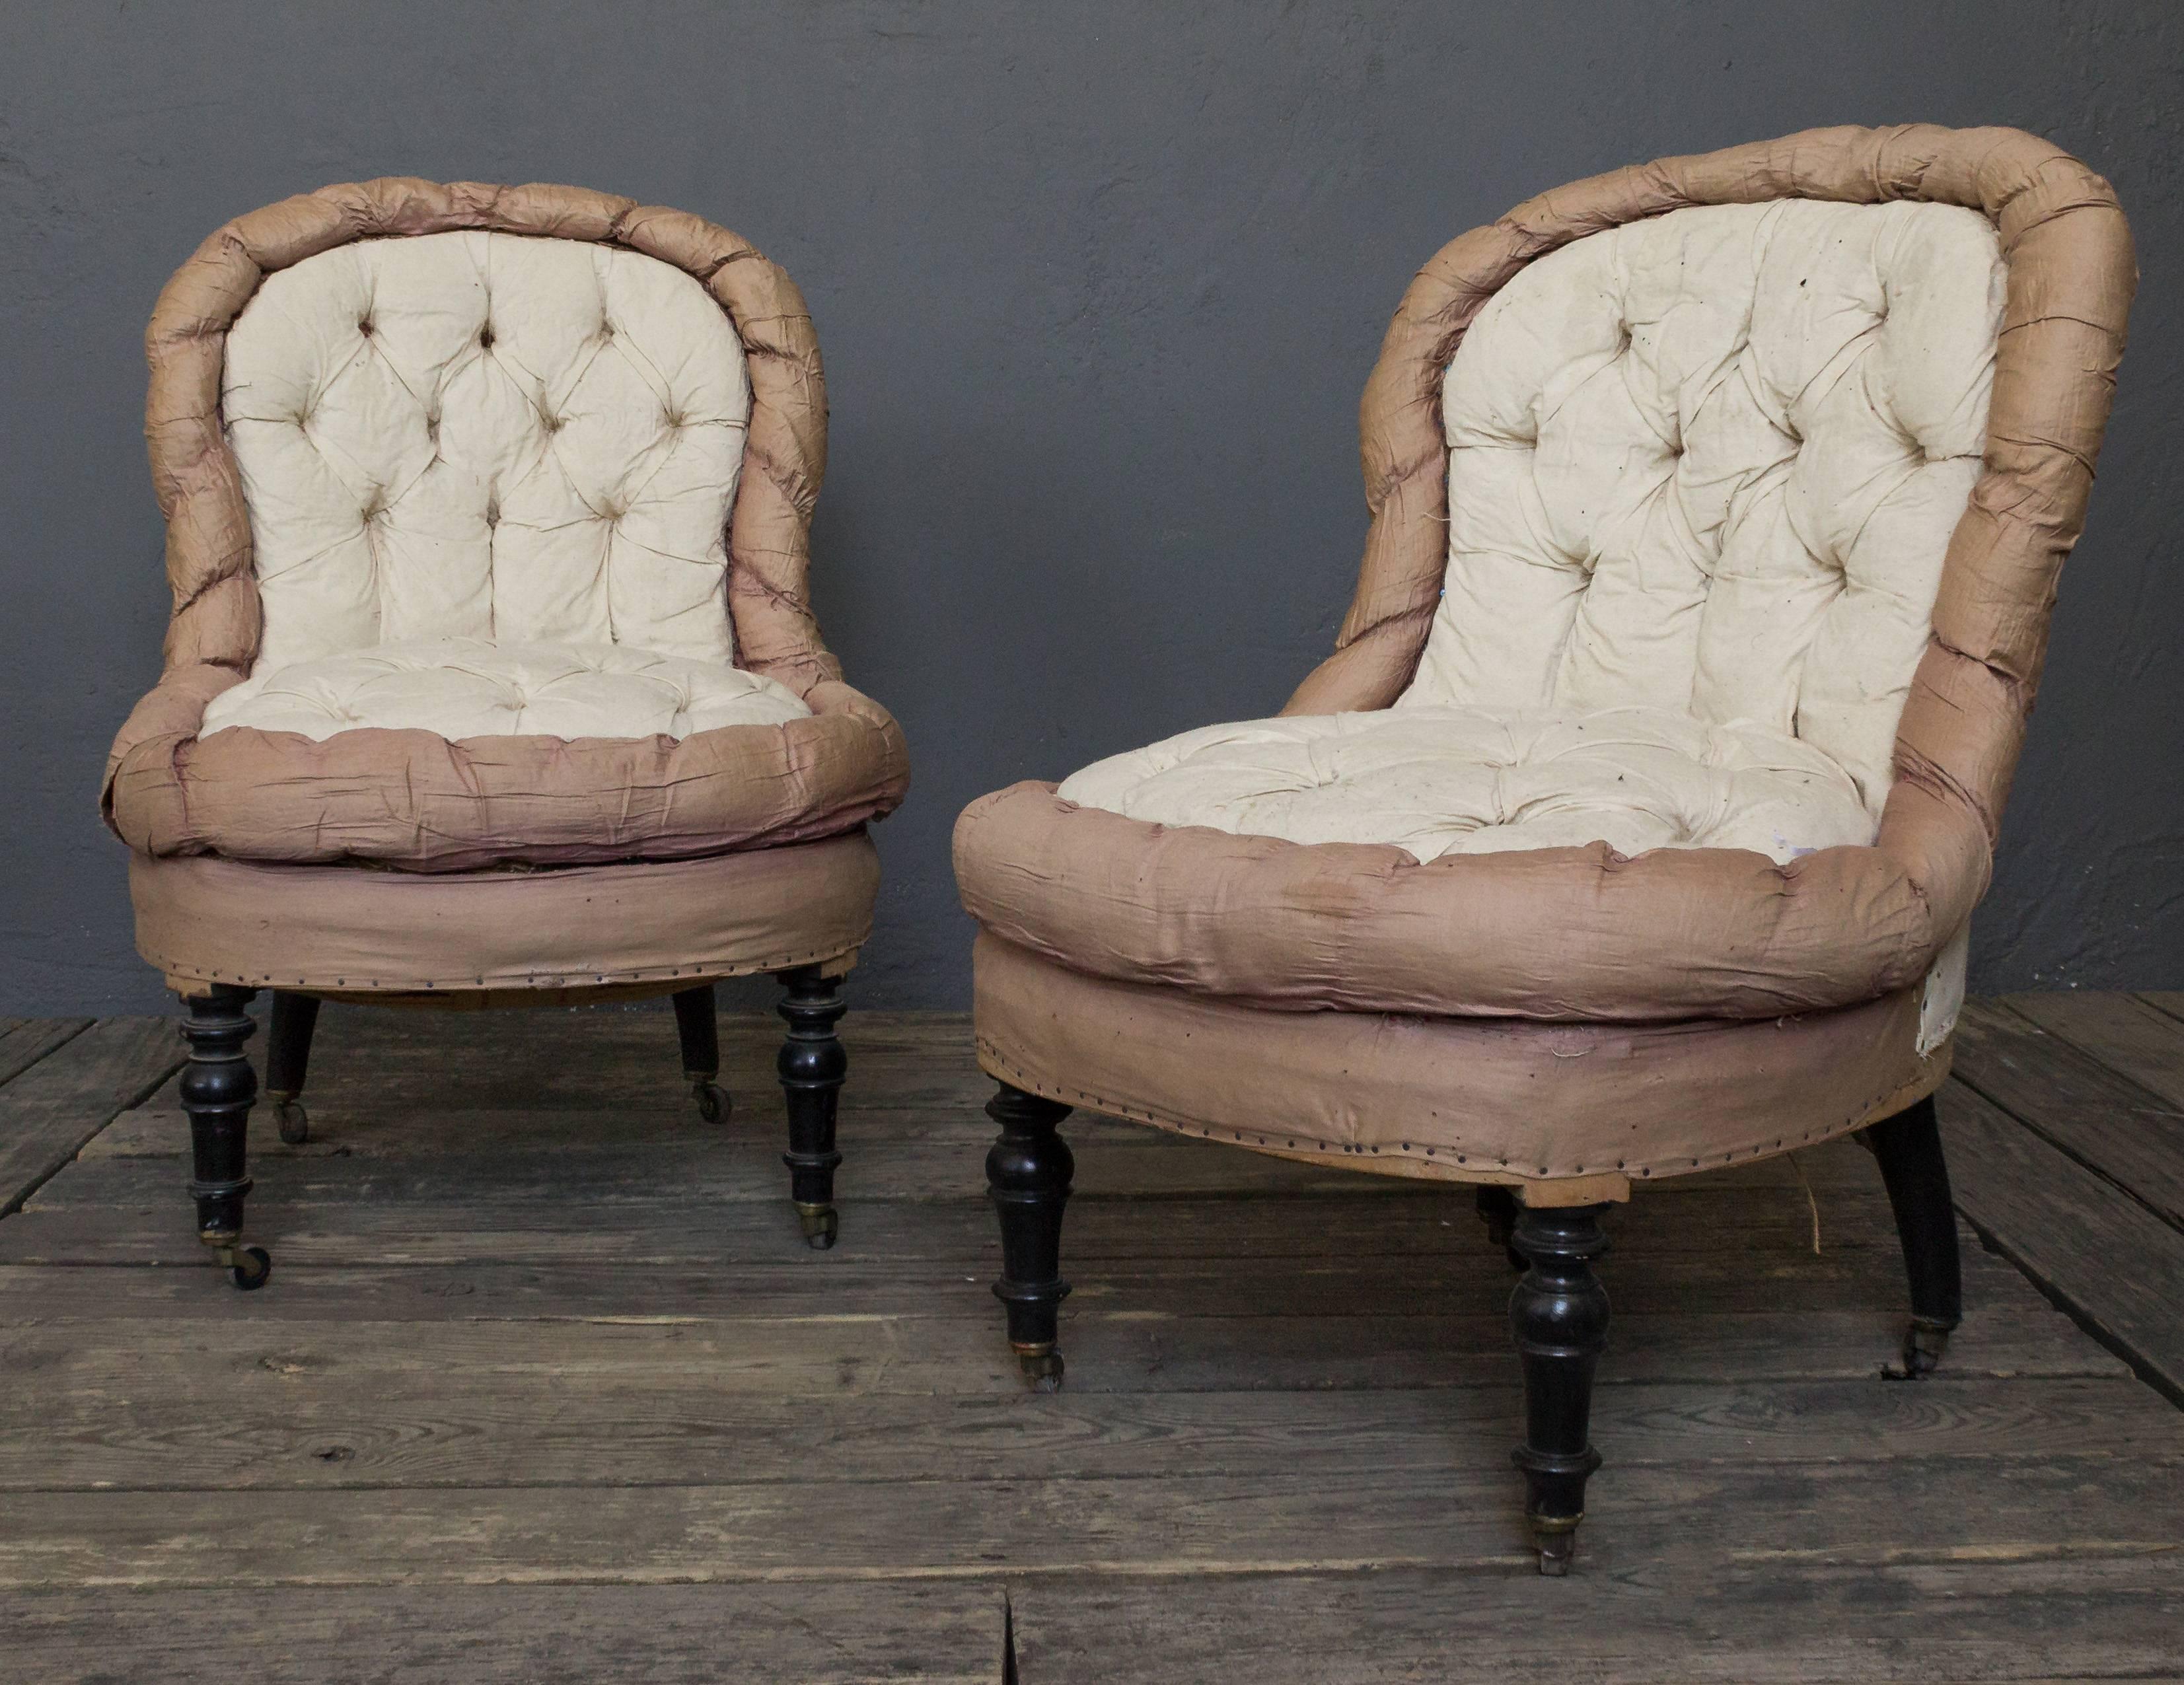 Pair of Napoleon III slipper chairs in muslin. The chairs are heavily tufts with a foxtail border.